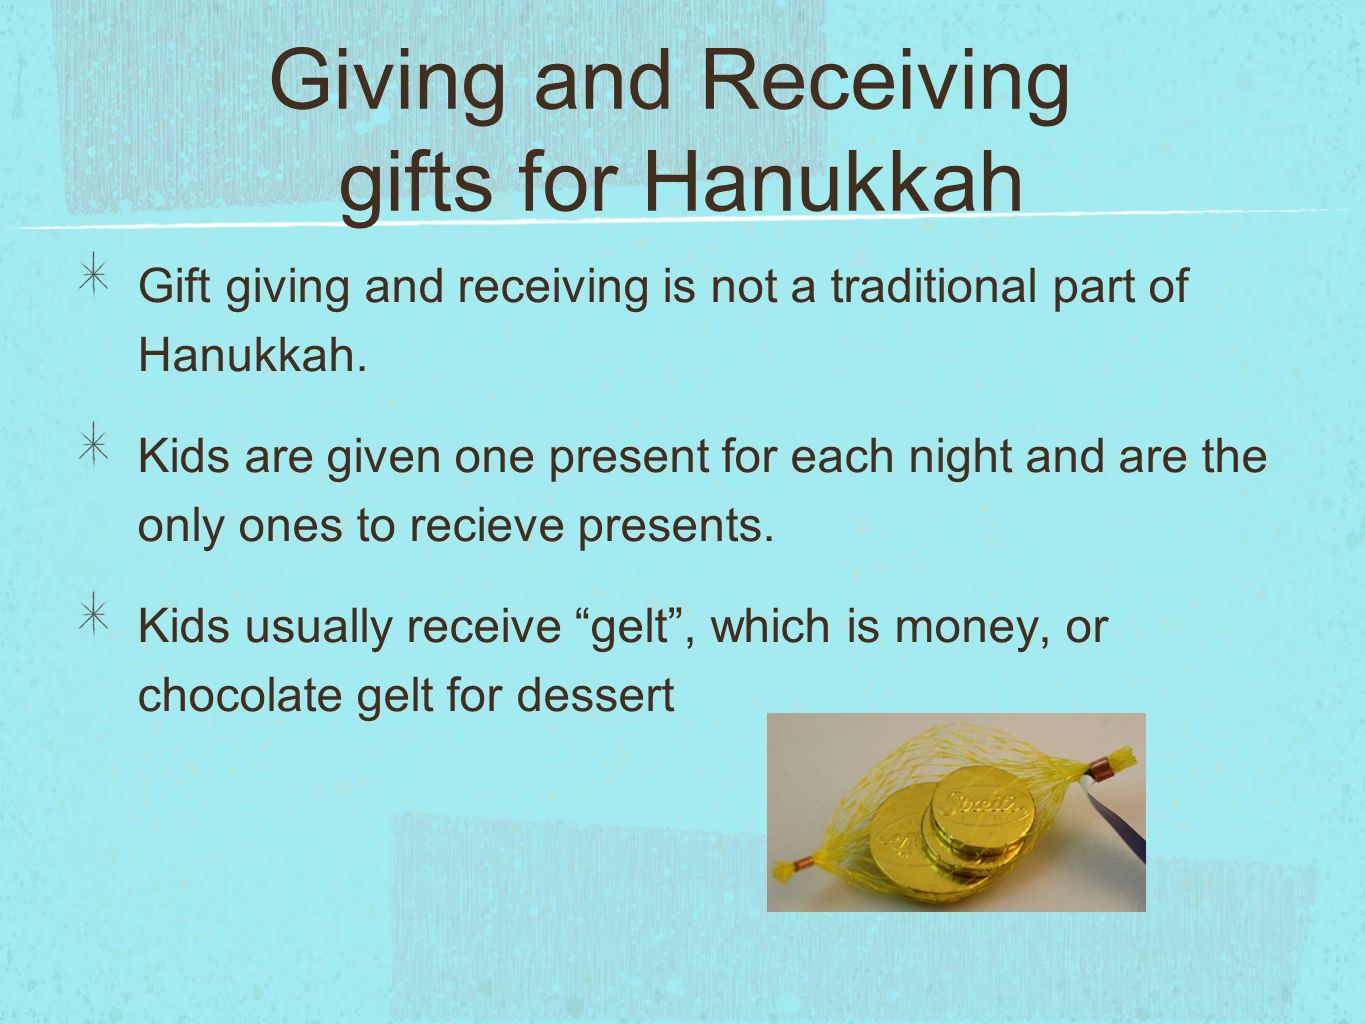 Gift giving and receiving is not a traditional part of Hanukkah.